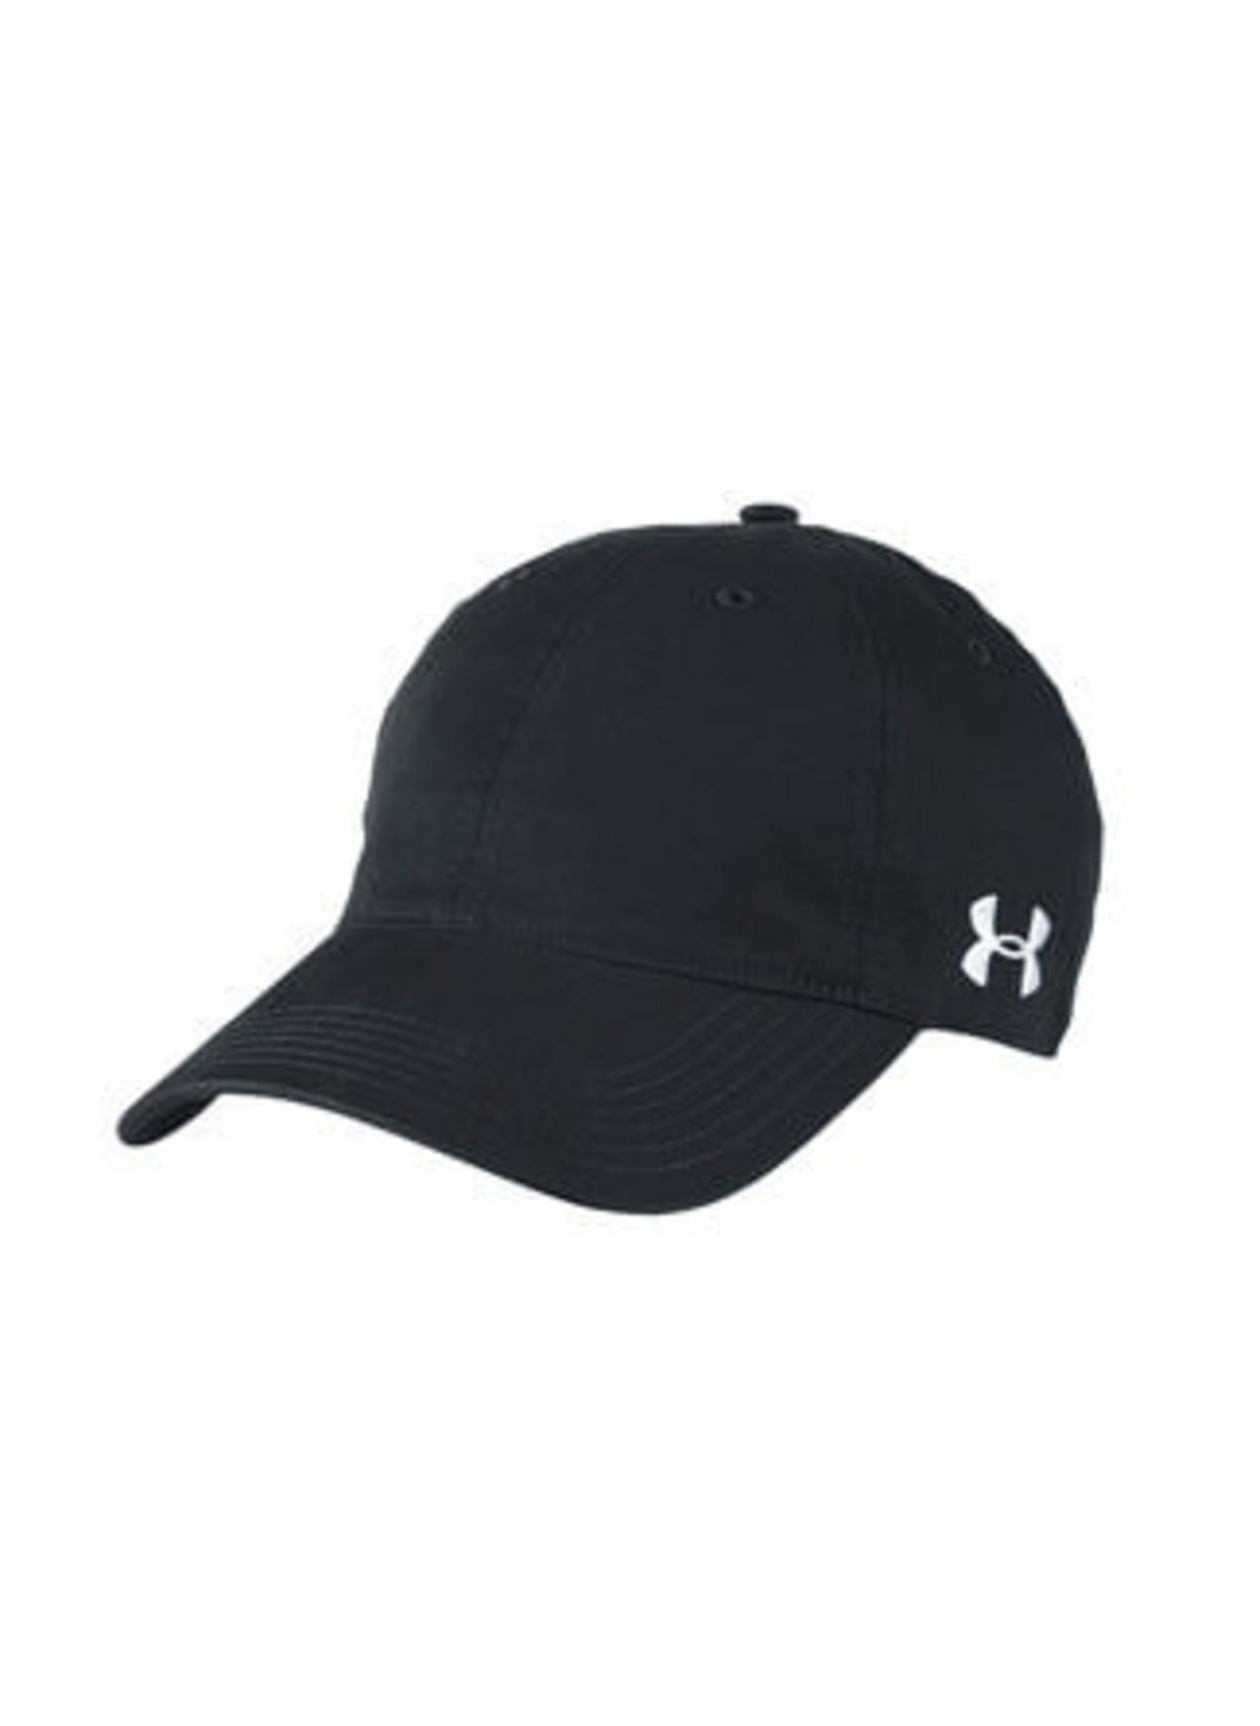 Under Armour Chino Adjustable Hat